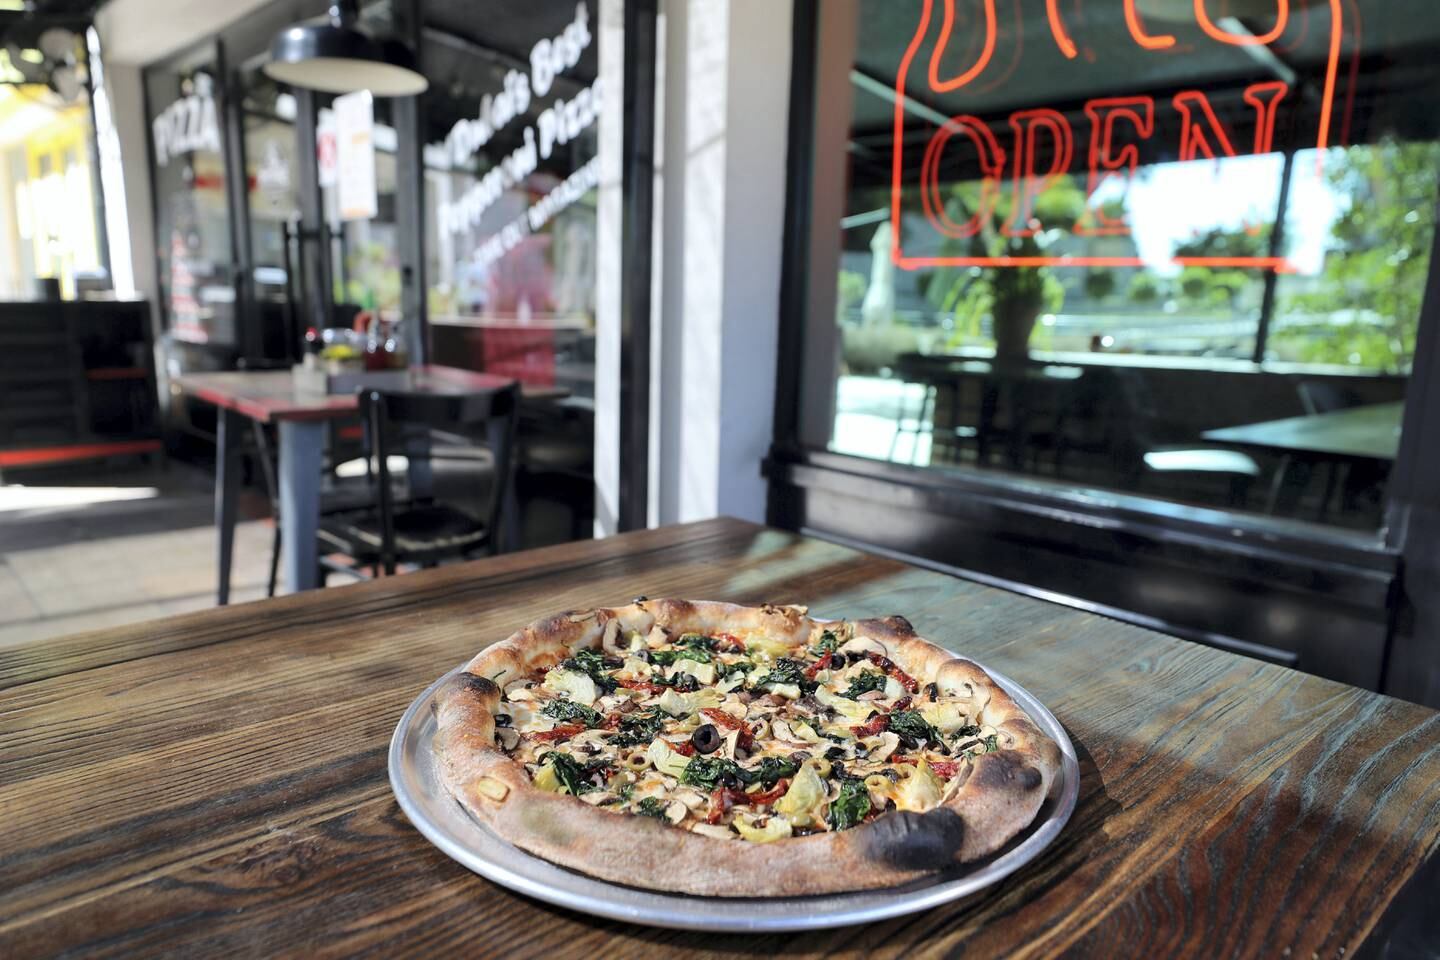 Dubai, United Arab Emirates - Reporter: Sophie Prideaux. Lifestyle. Food. Restaurant feature. Eat your way around JLT. A Vegie Premo pizza from Pitfire Pizza. Monday, January 18th, 2021. Dubai. Chris Whiteoak / The National